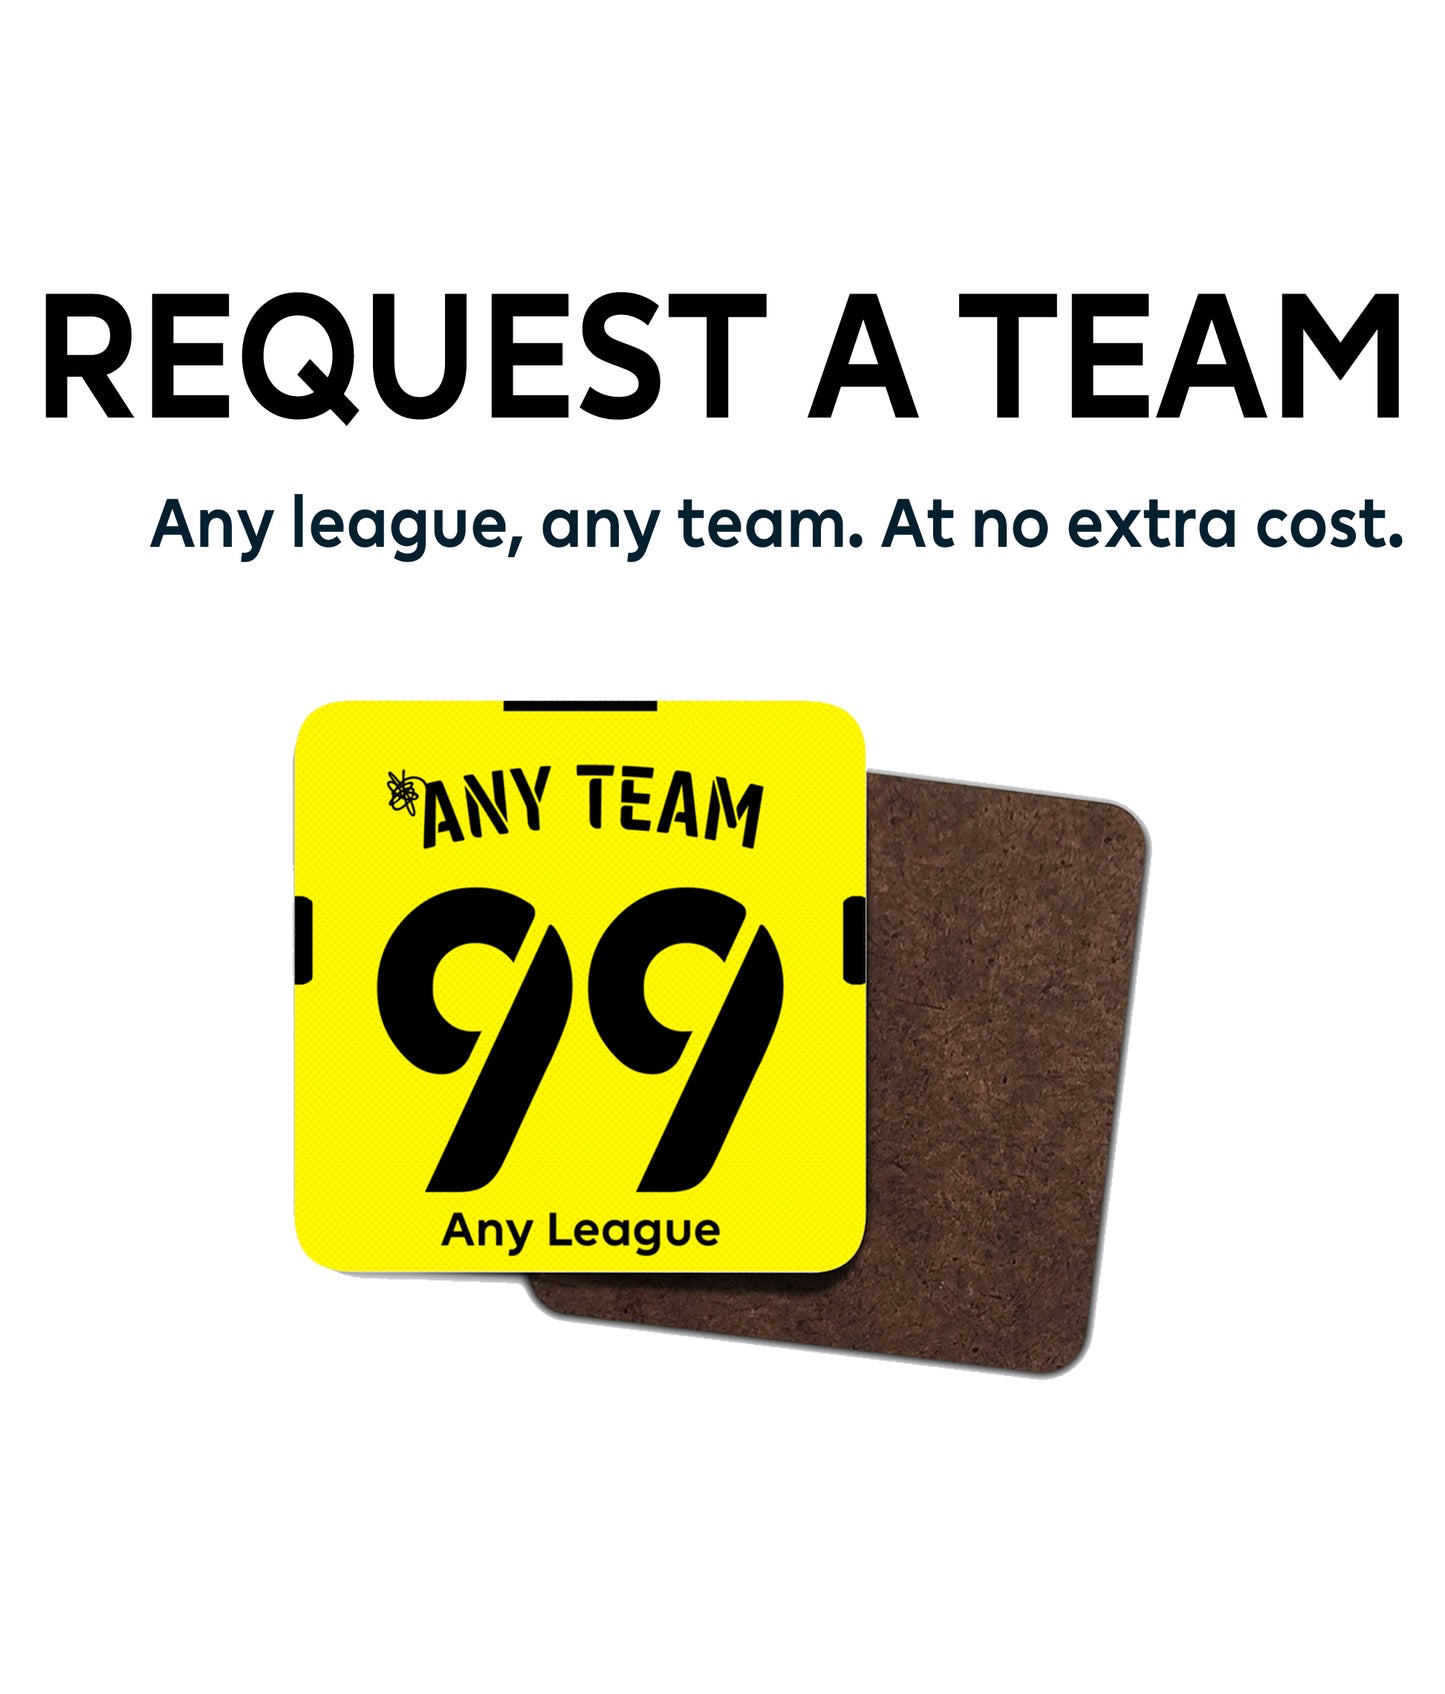 Request A Team - Personalised Coaster